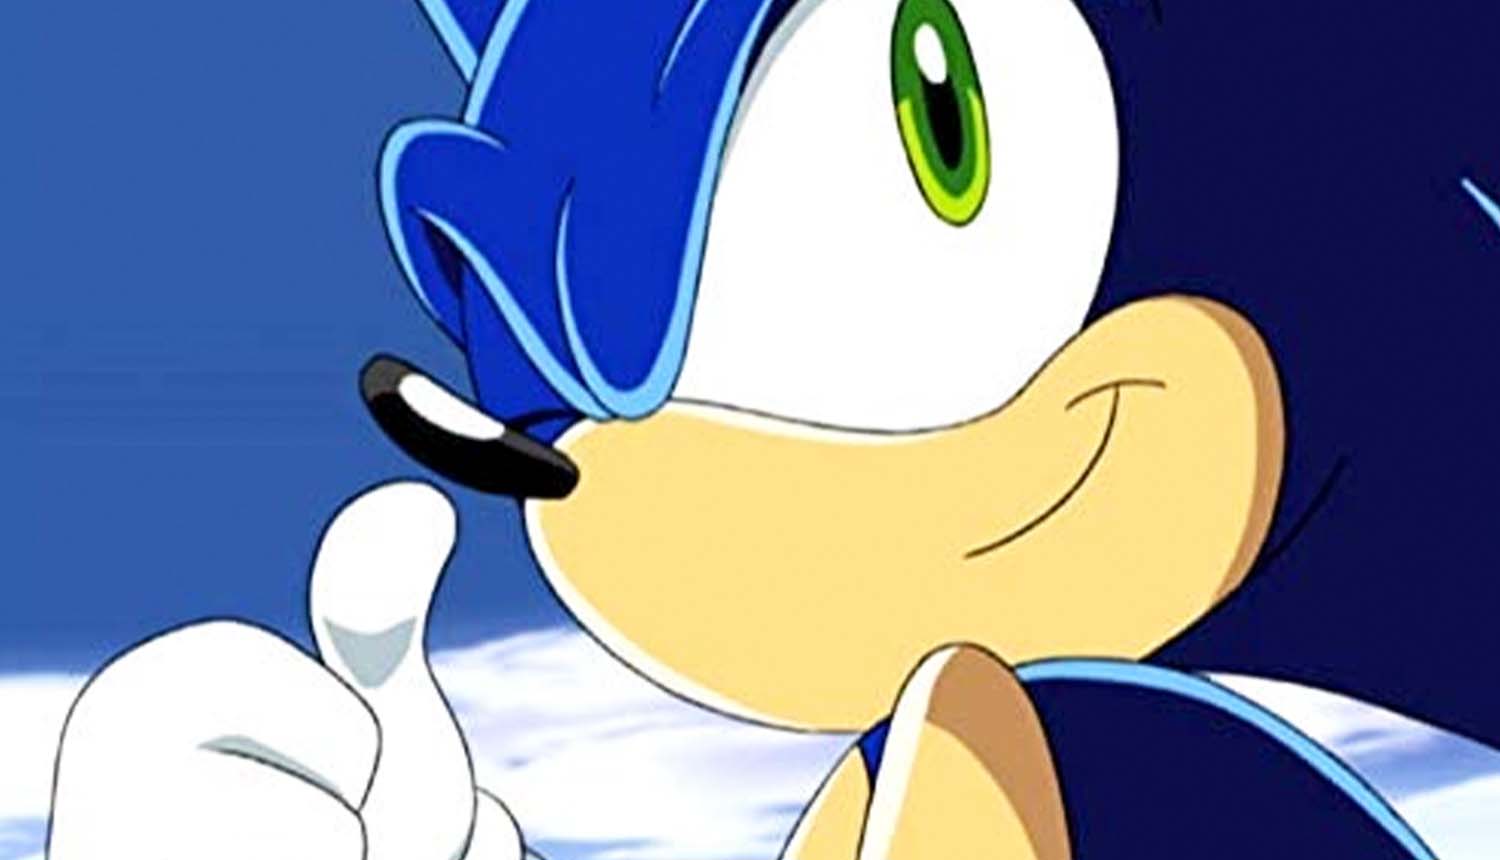 Sonic X - Plugged In